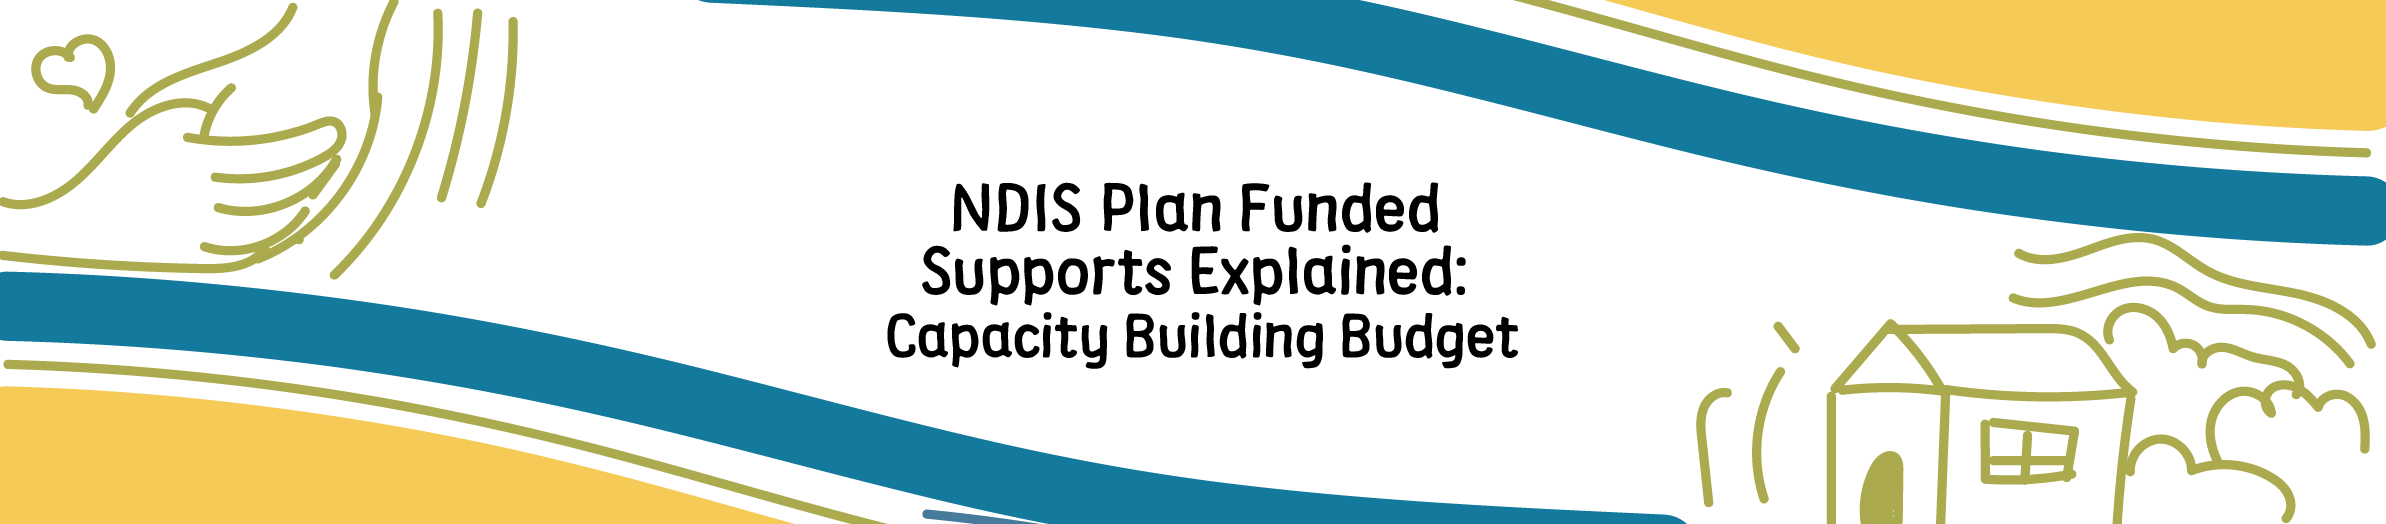 Featured image: NDIS Plan Funded Support Explained: Capacity Building Budget - Read full post: NDIS Plan Funded Supports Explained: Capacity Building Budget